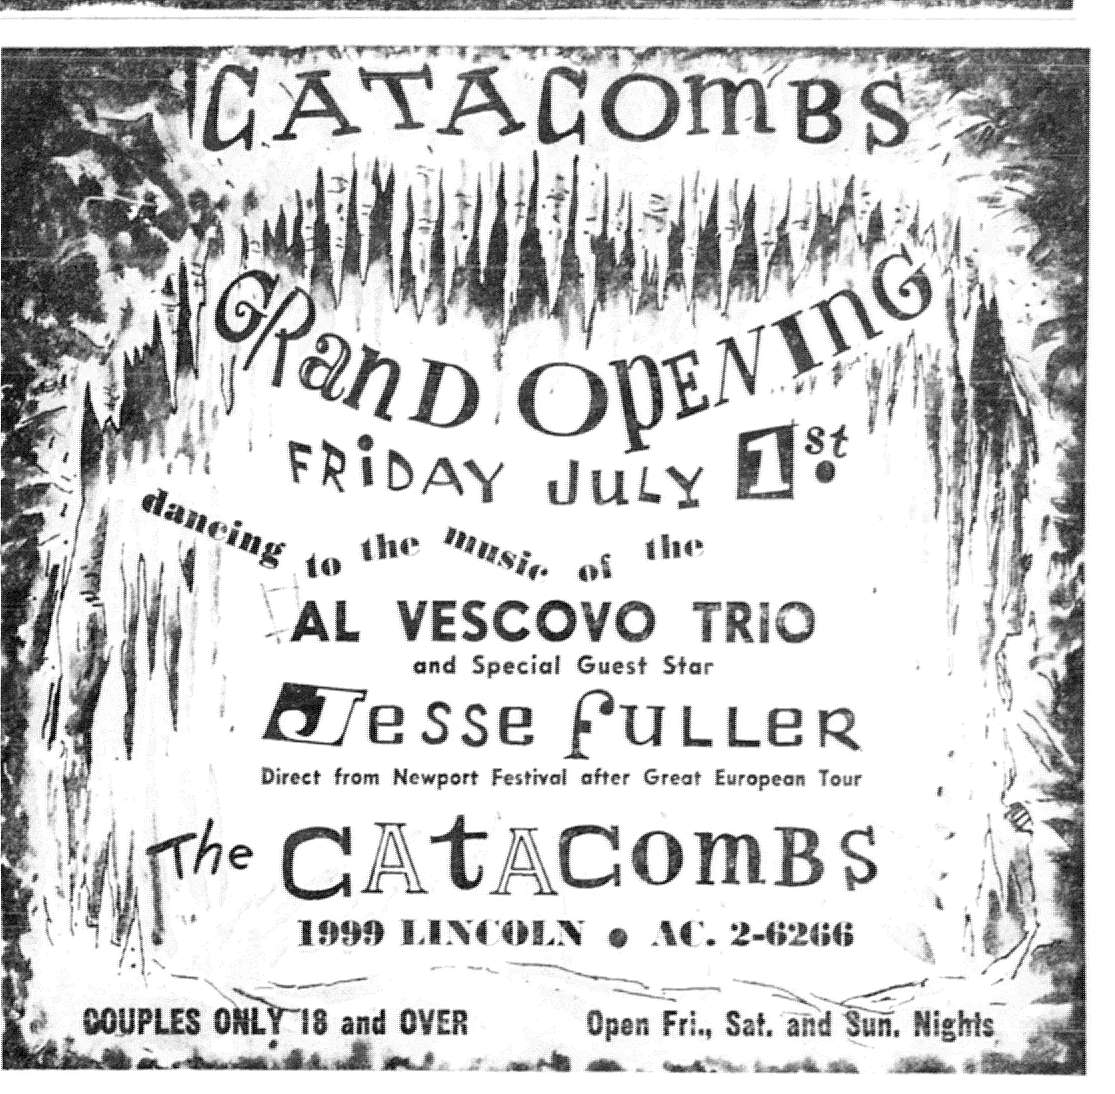 Now before this thread gets too unwieldy I wanna jump a bit ahead in the narrative. It was OTD 60 yrs ago that the Denver folk scene got a new club - the Catacombs, located in the basement underneath the Exodus in the Raylane Hotel. He saw Jesse Fuller. 11/